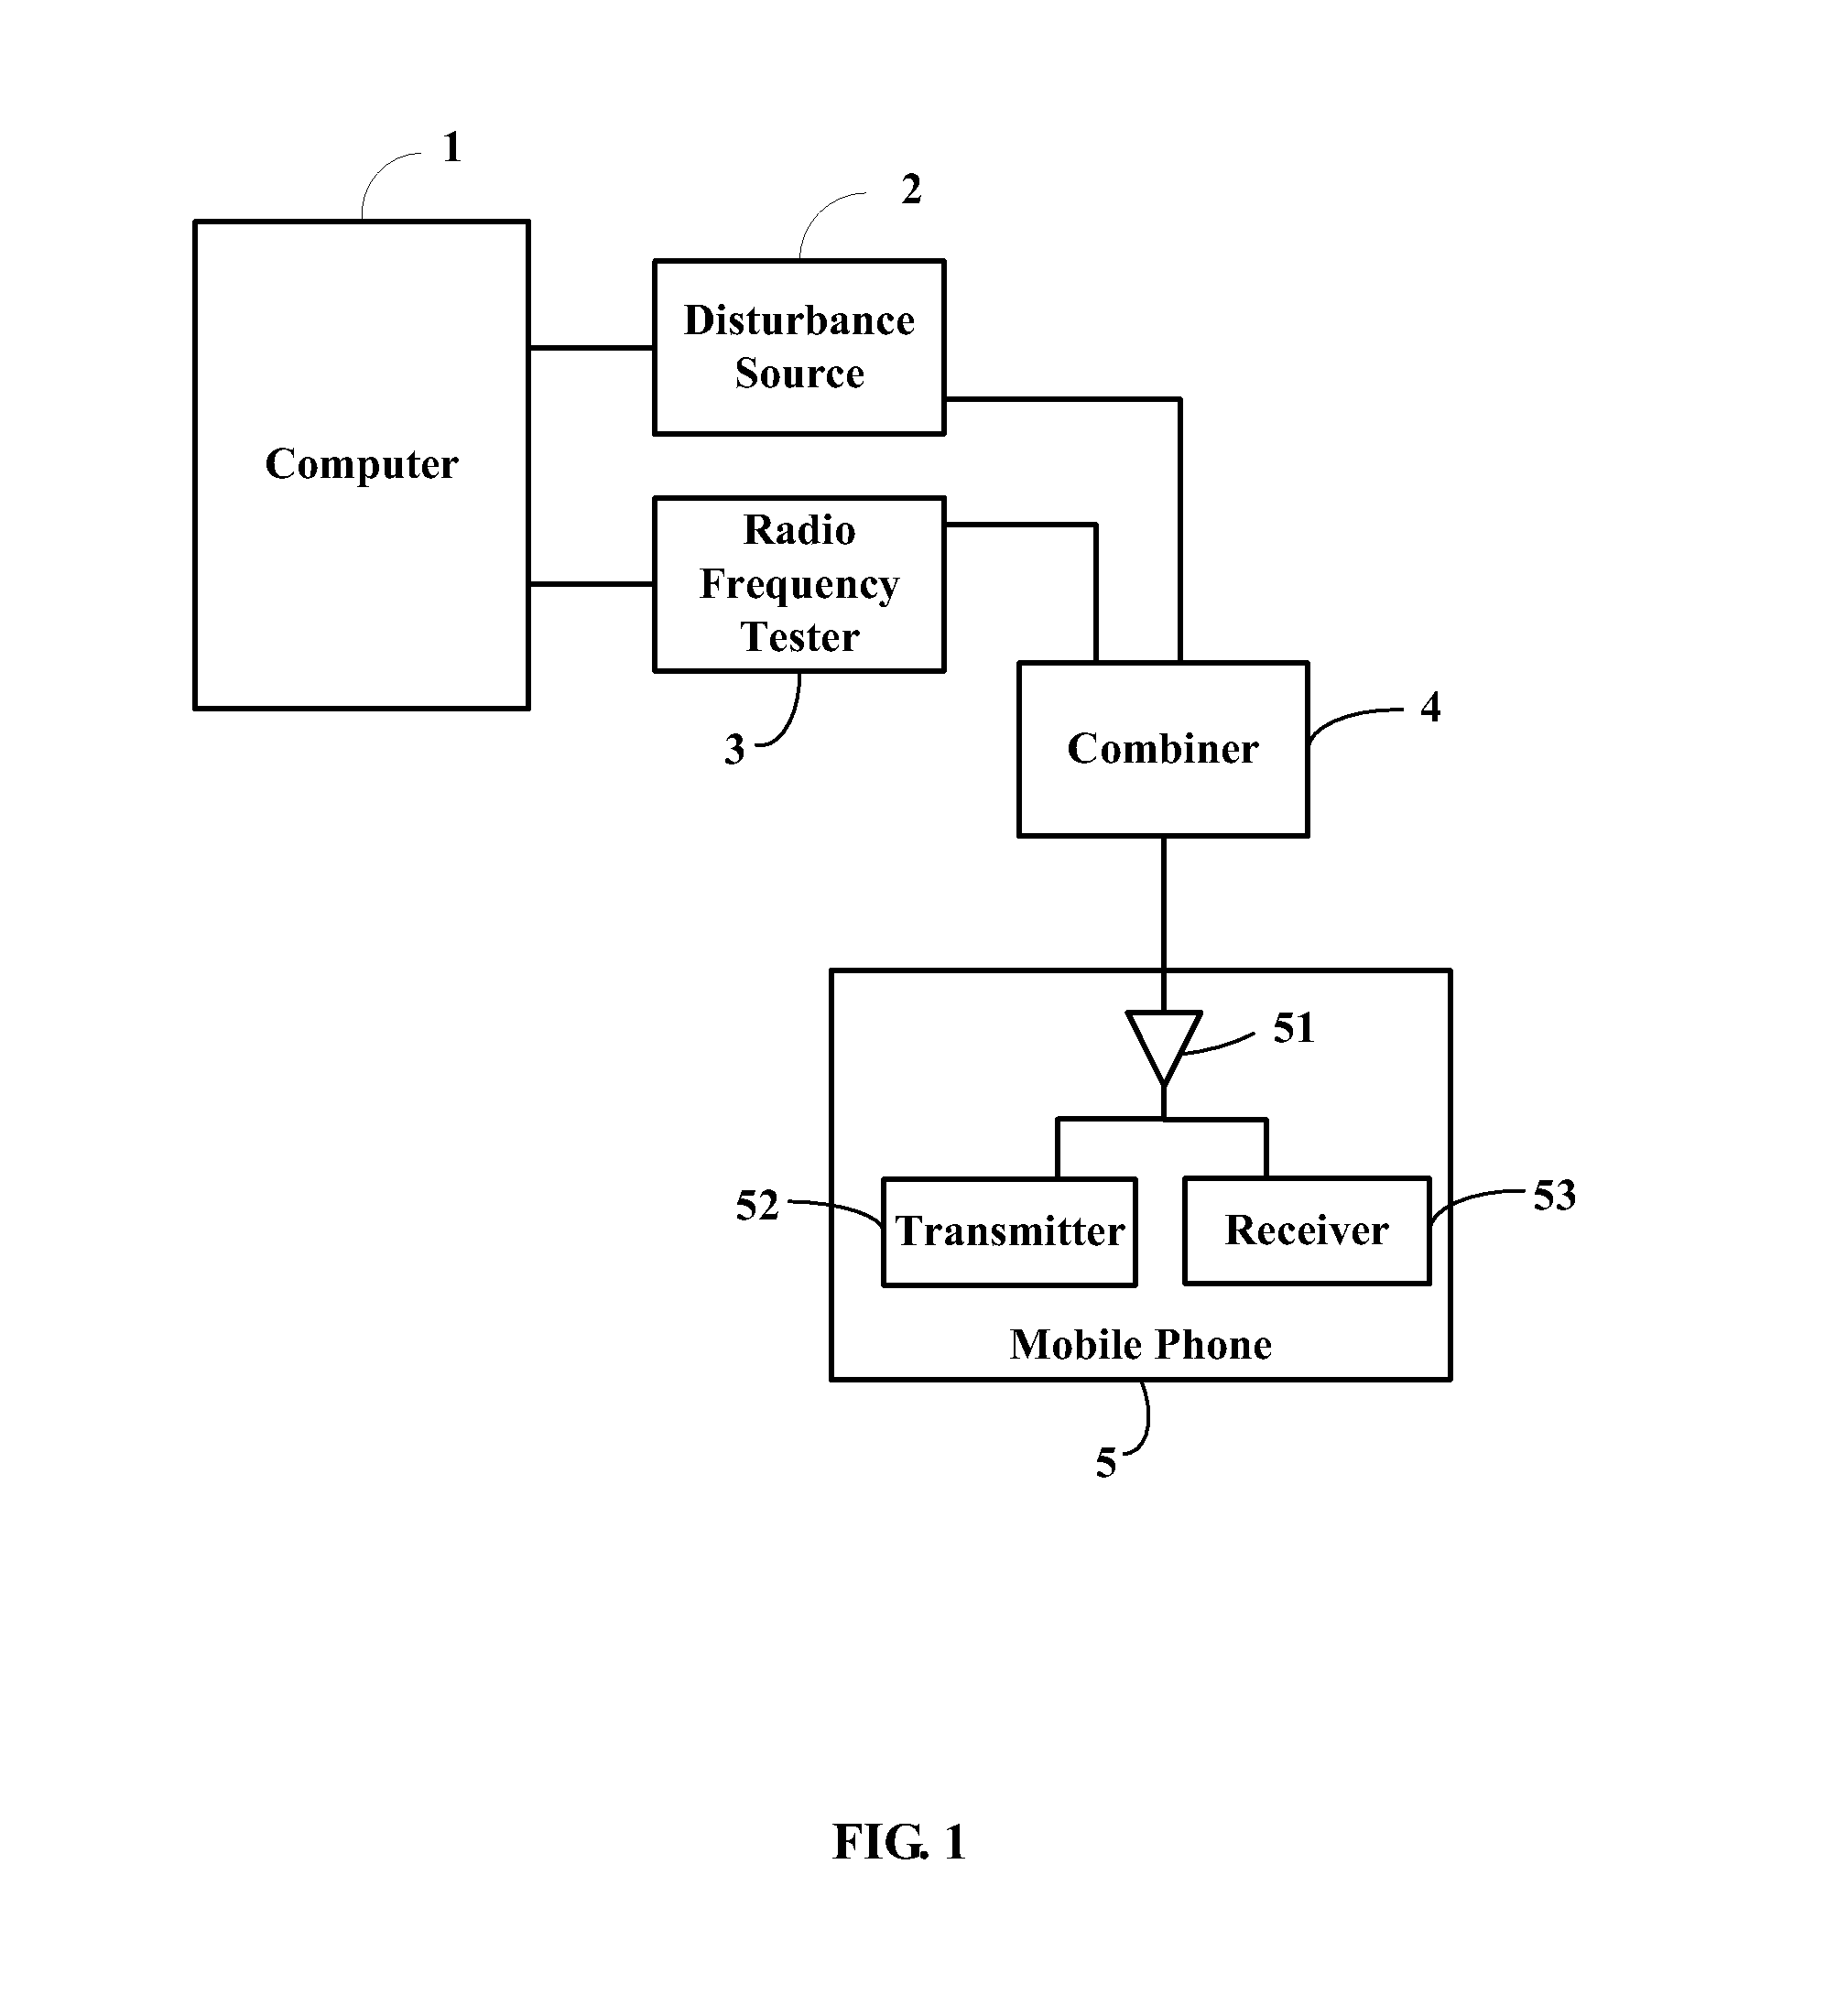 Method for performing a radio frequency test on a mobile phone